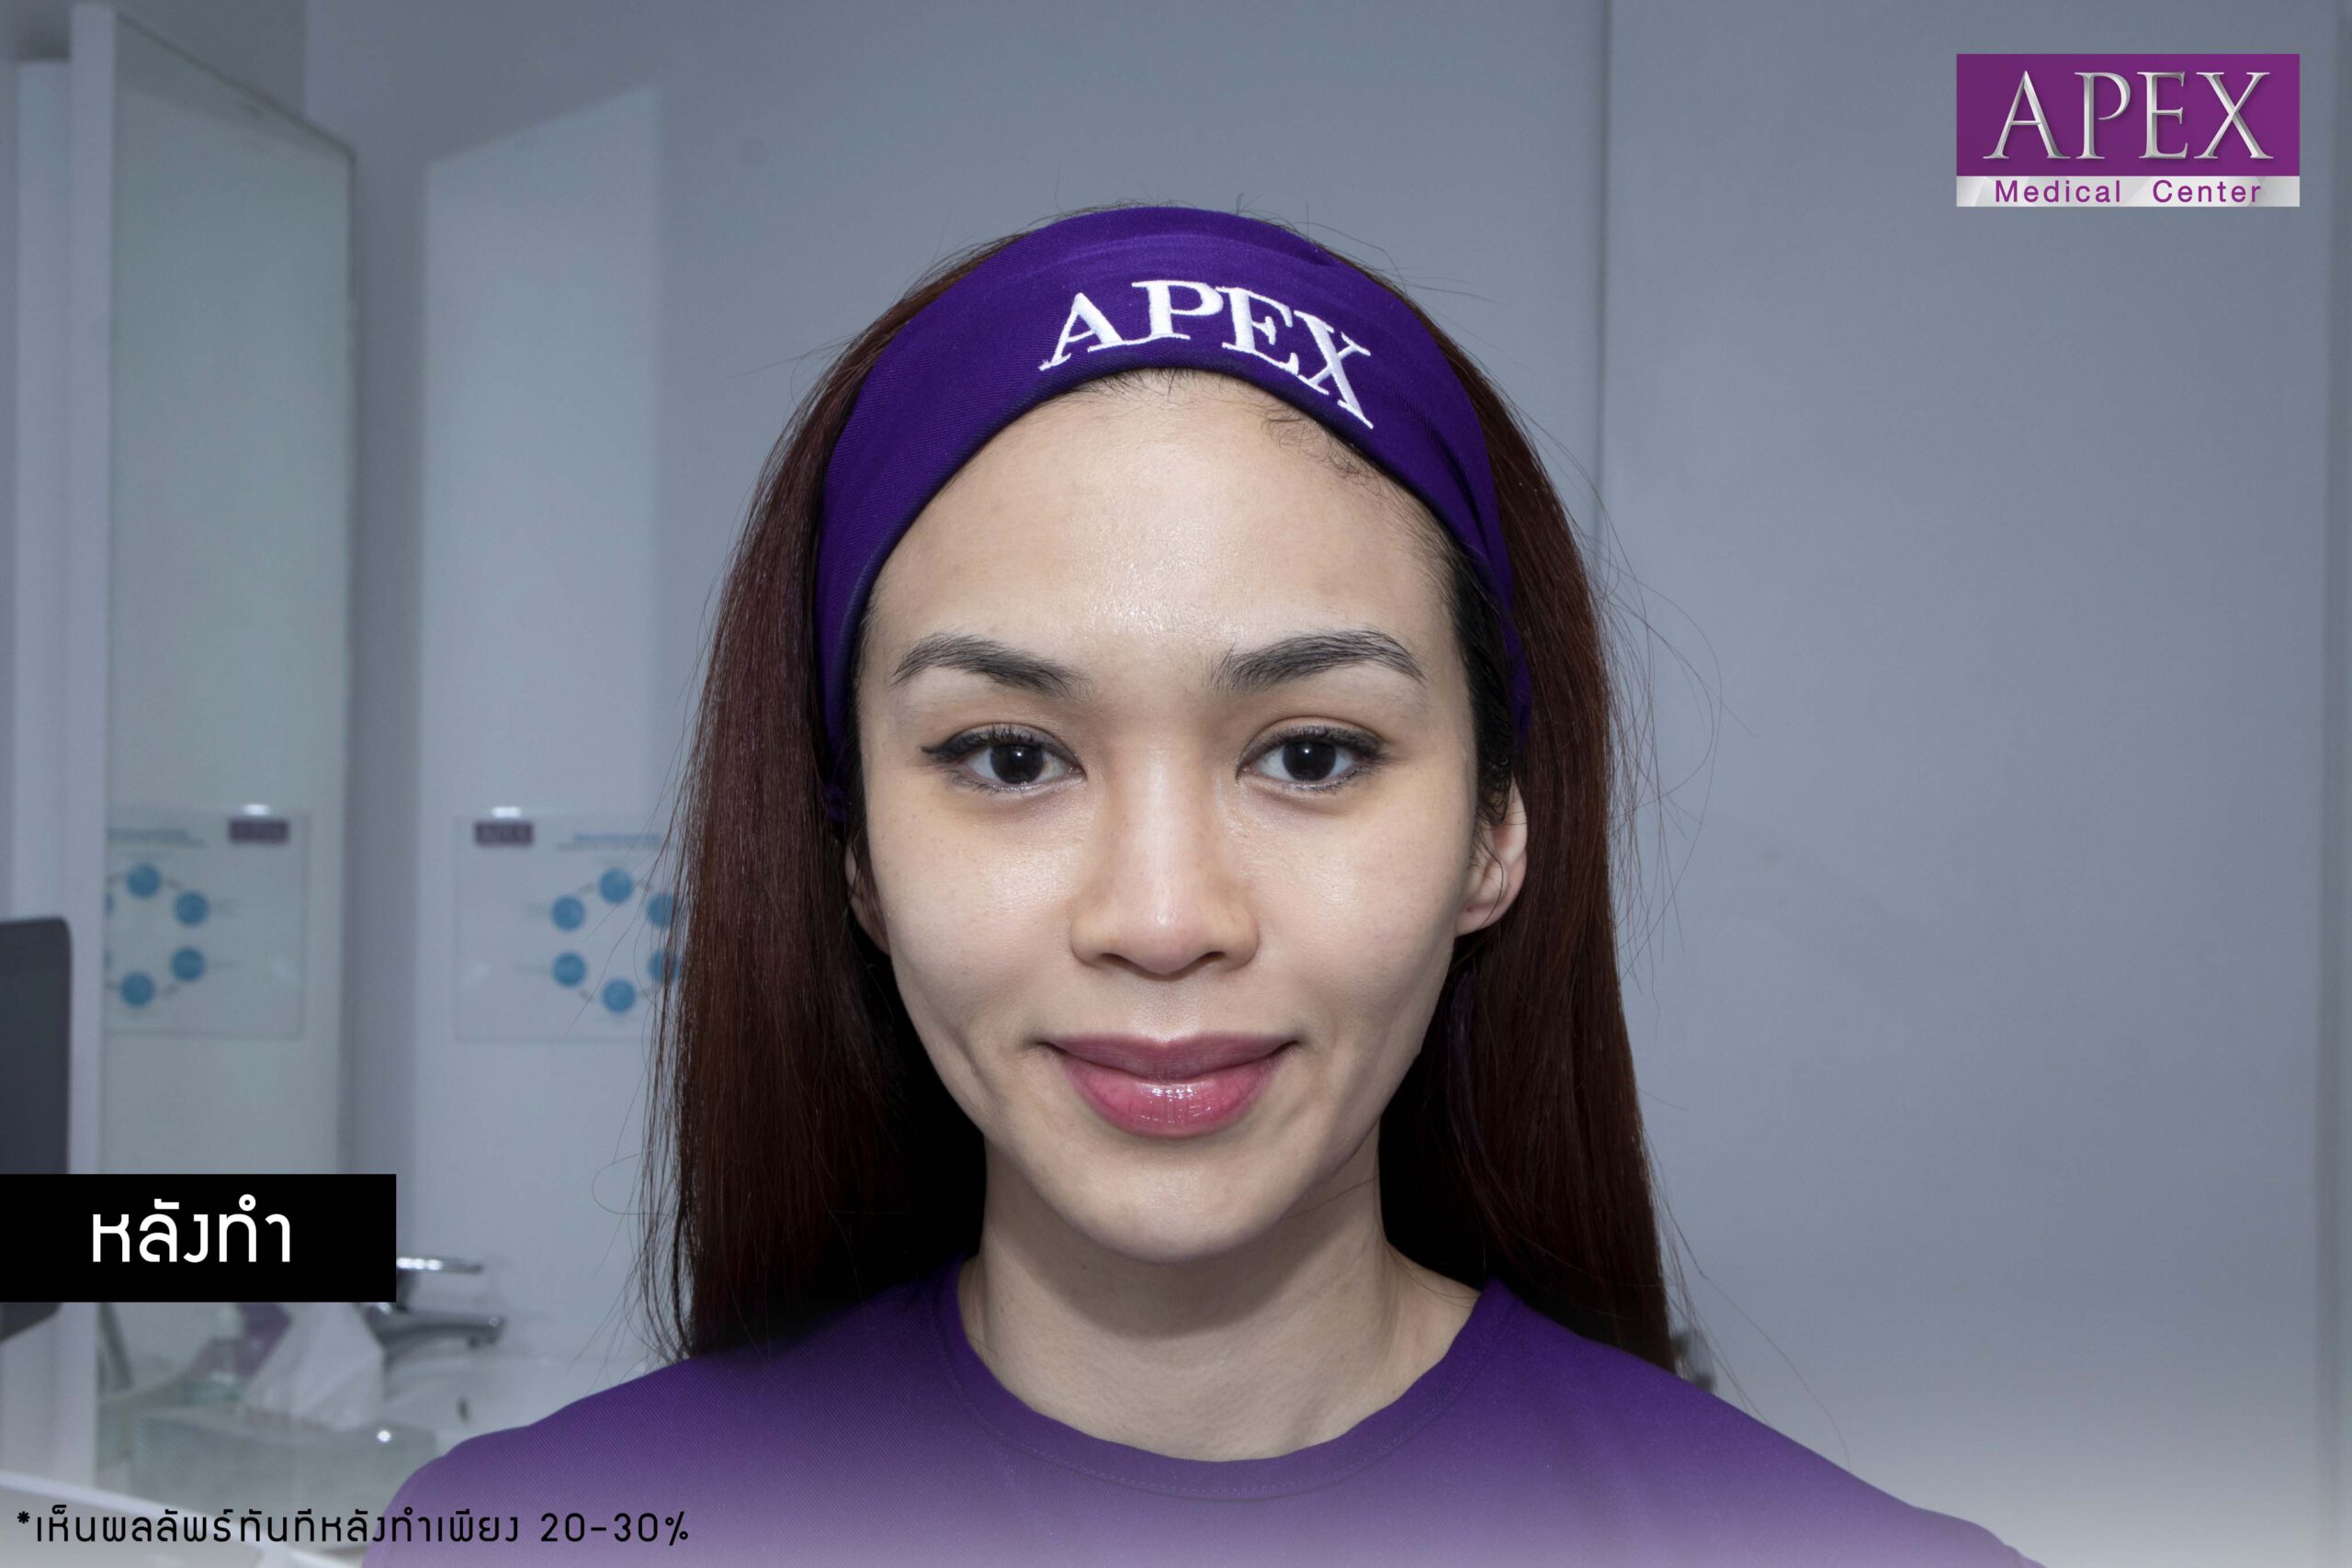 Face and skin after Thermage. The result is firmer skin, clearer facial contours, and lifted eyebrows.